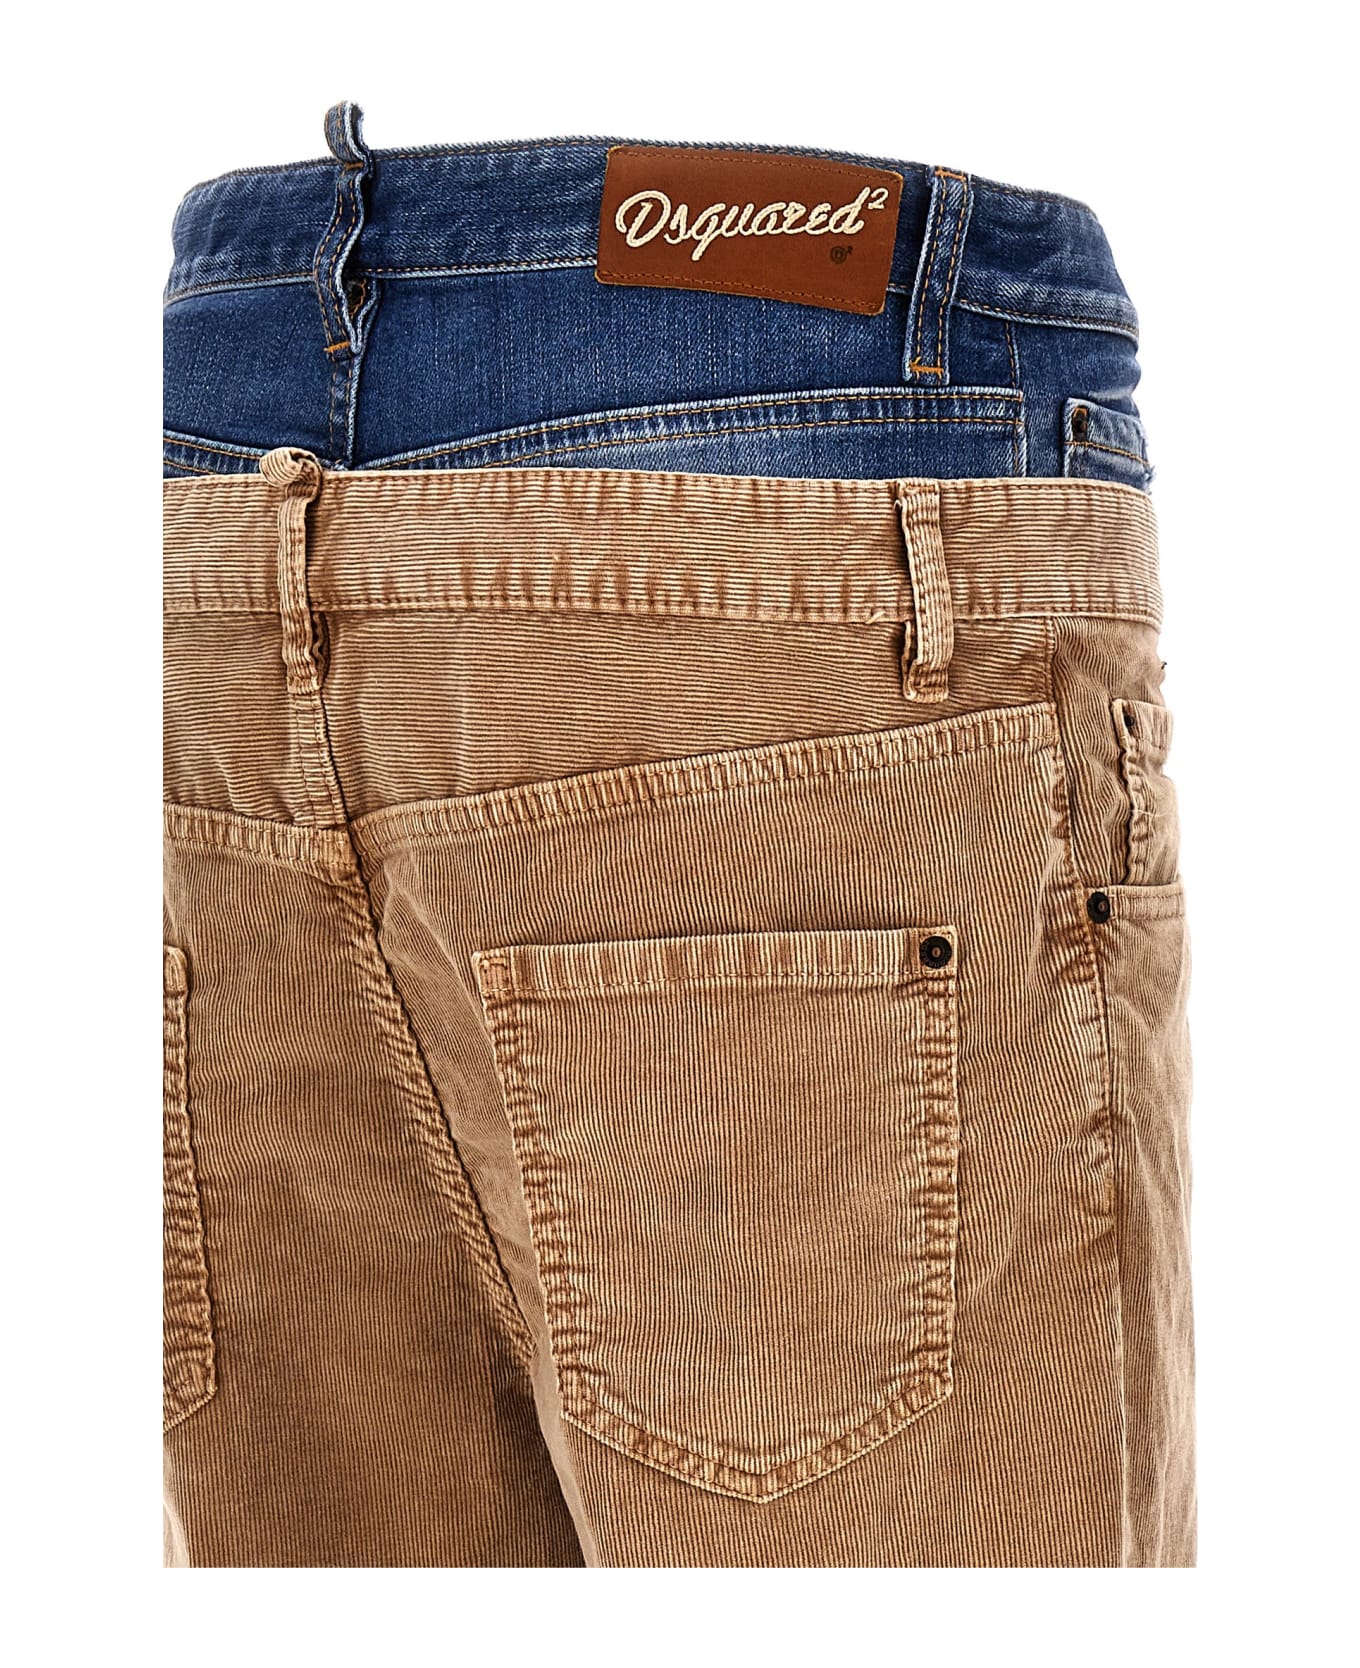 Dsquared2 '642 Twin Pack' Jeans - Beige